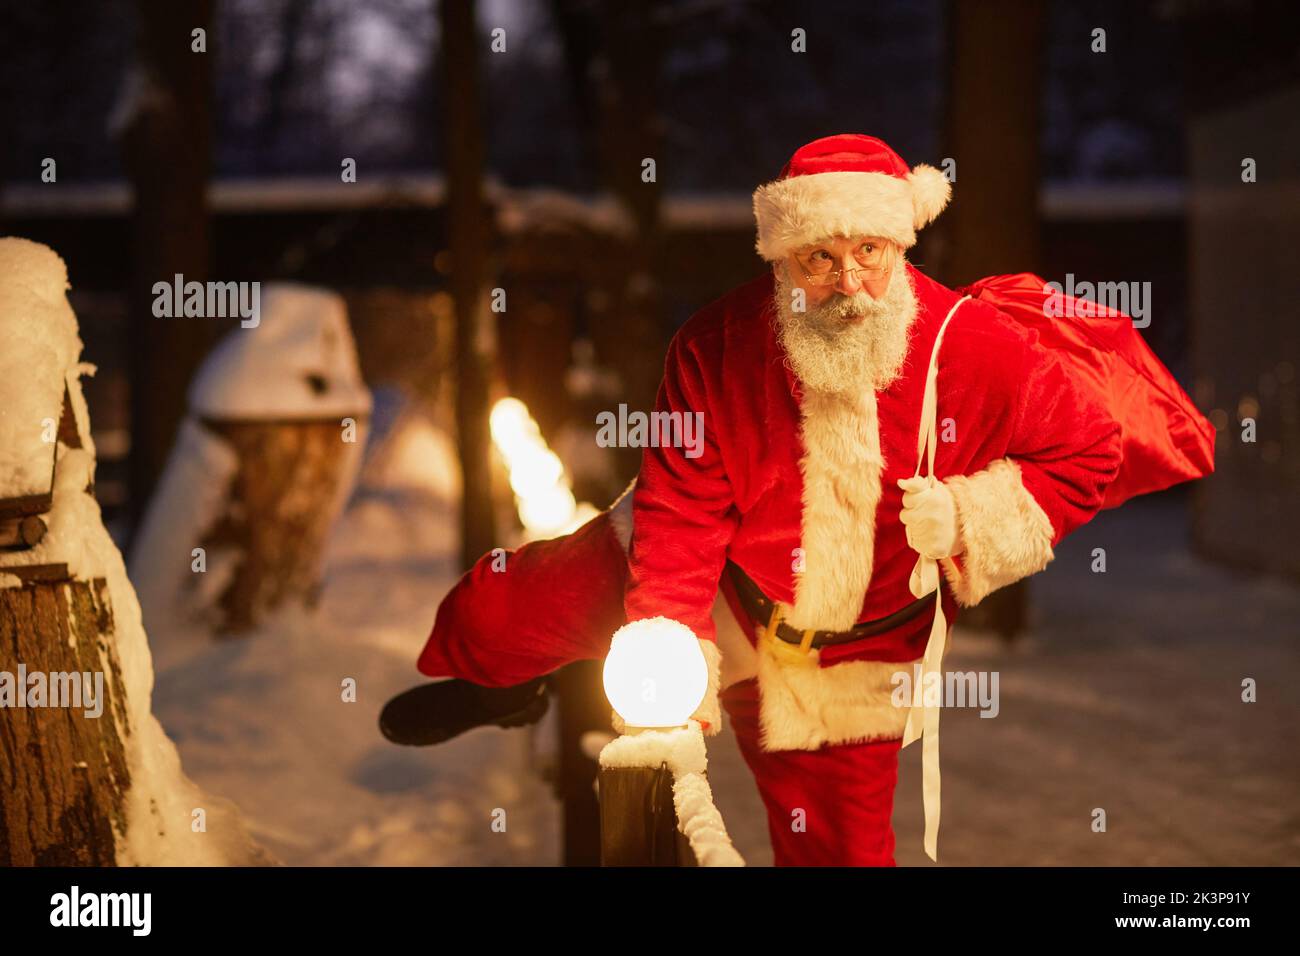 Portrait of traditional Santa Claus with sack of presents climbing over fence outdoors on Christmas eve Stock Photo